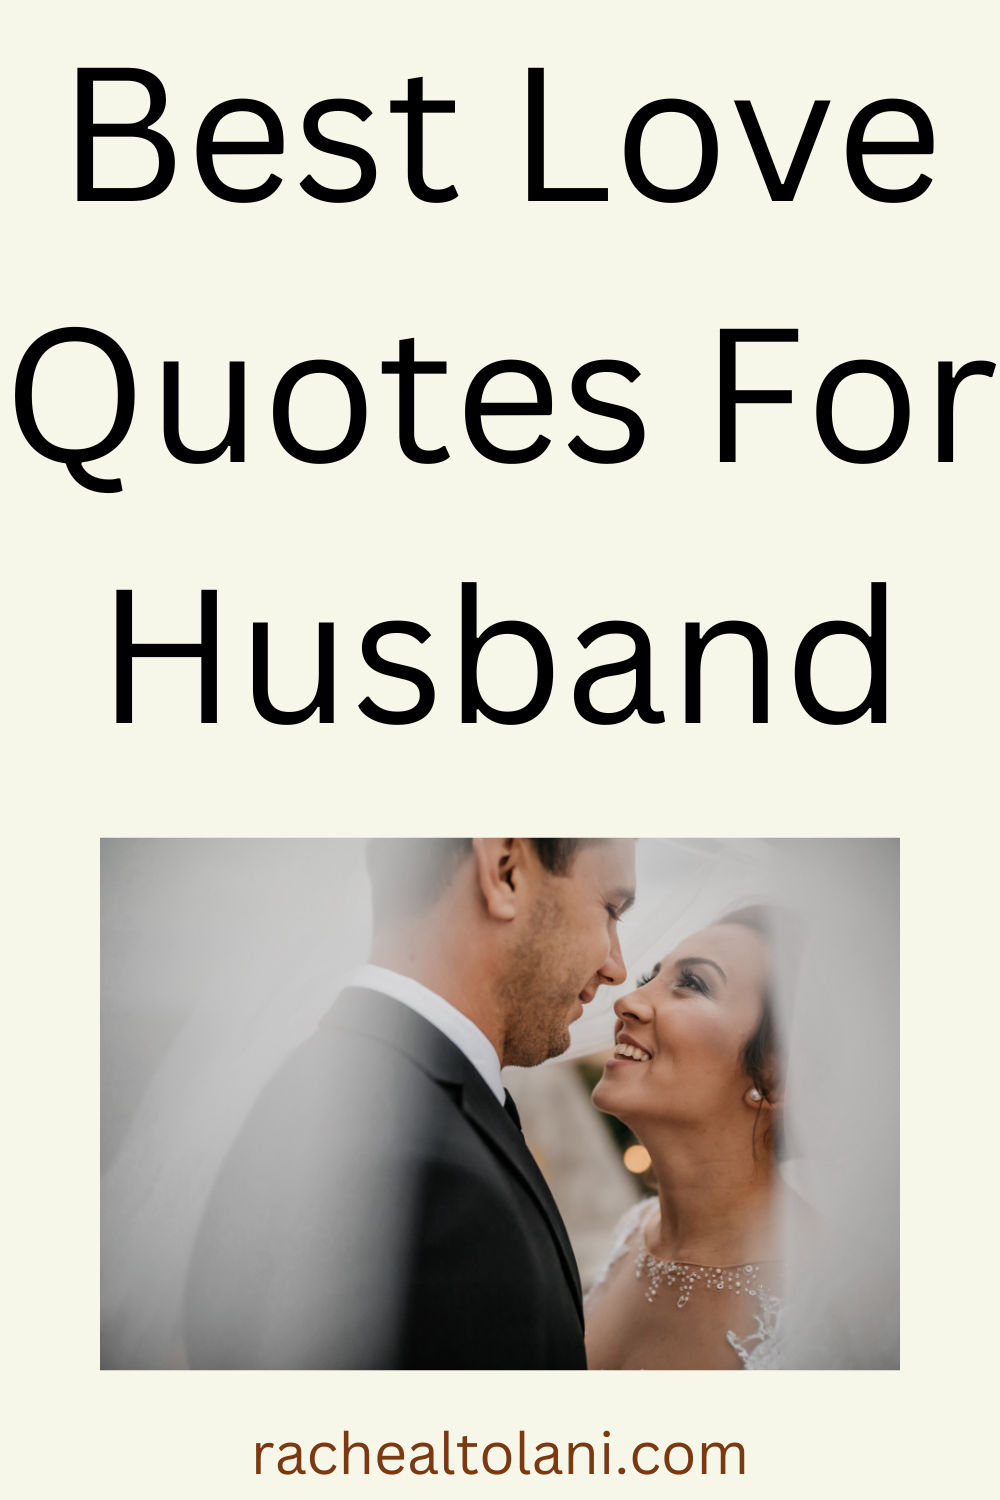 Love quotes for husbands